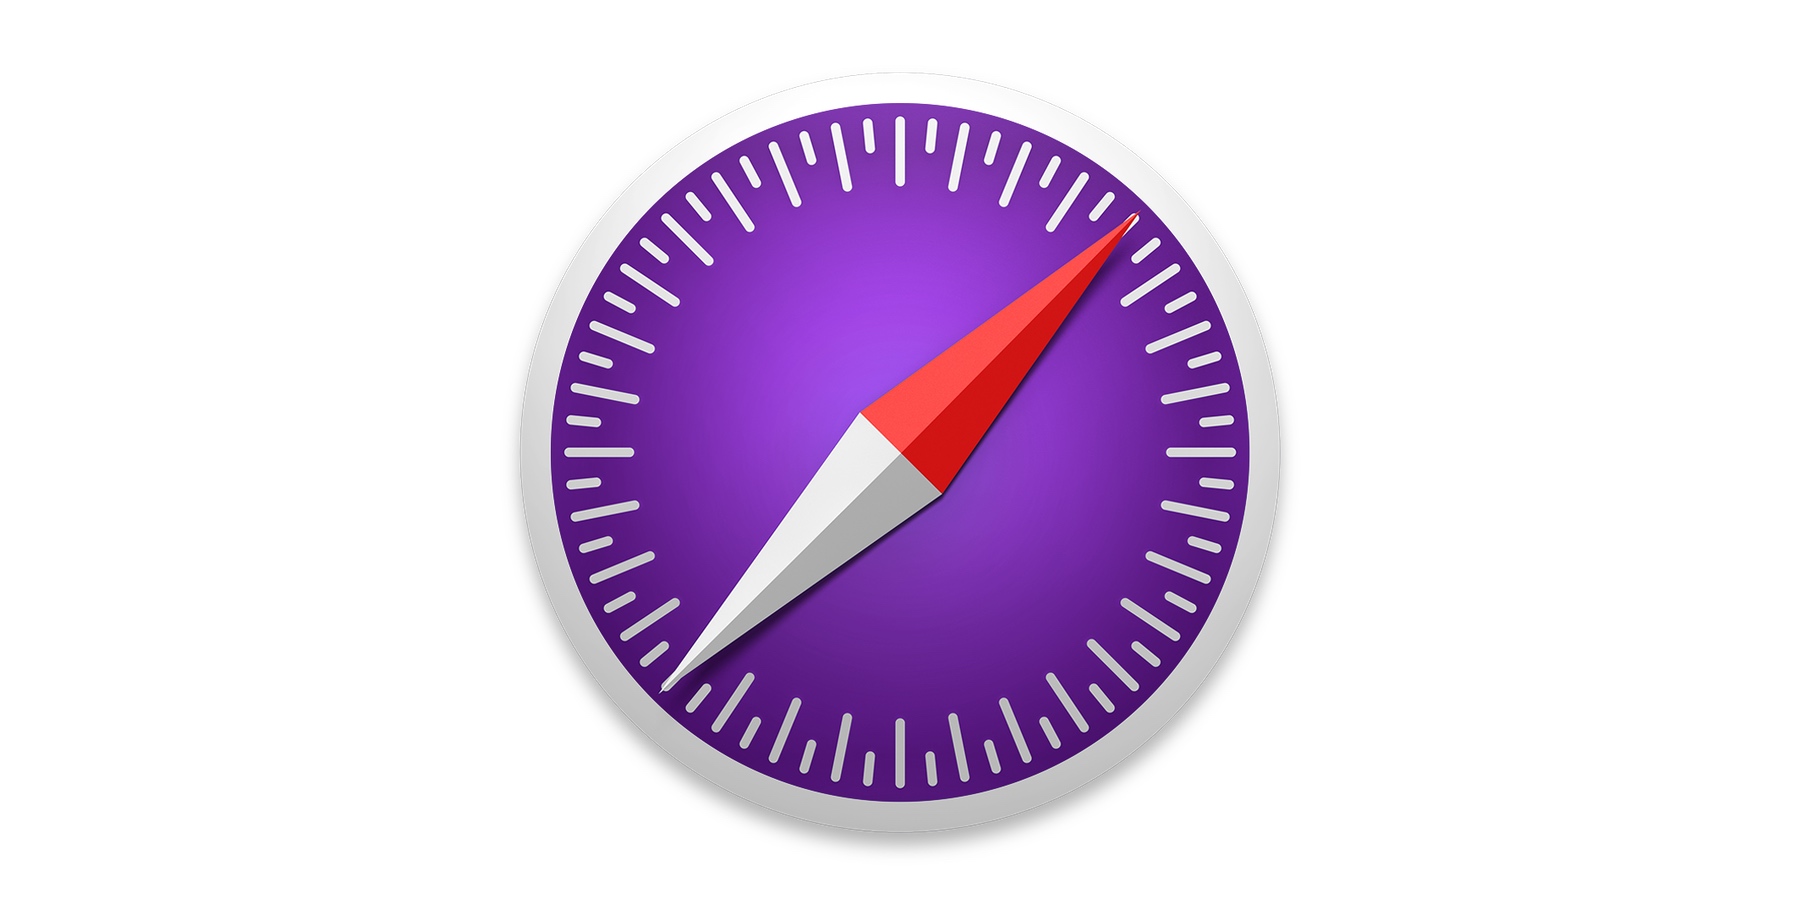 safari technology preview for 10.10.5